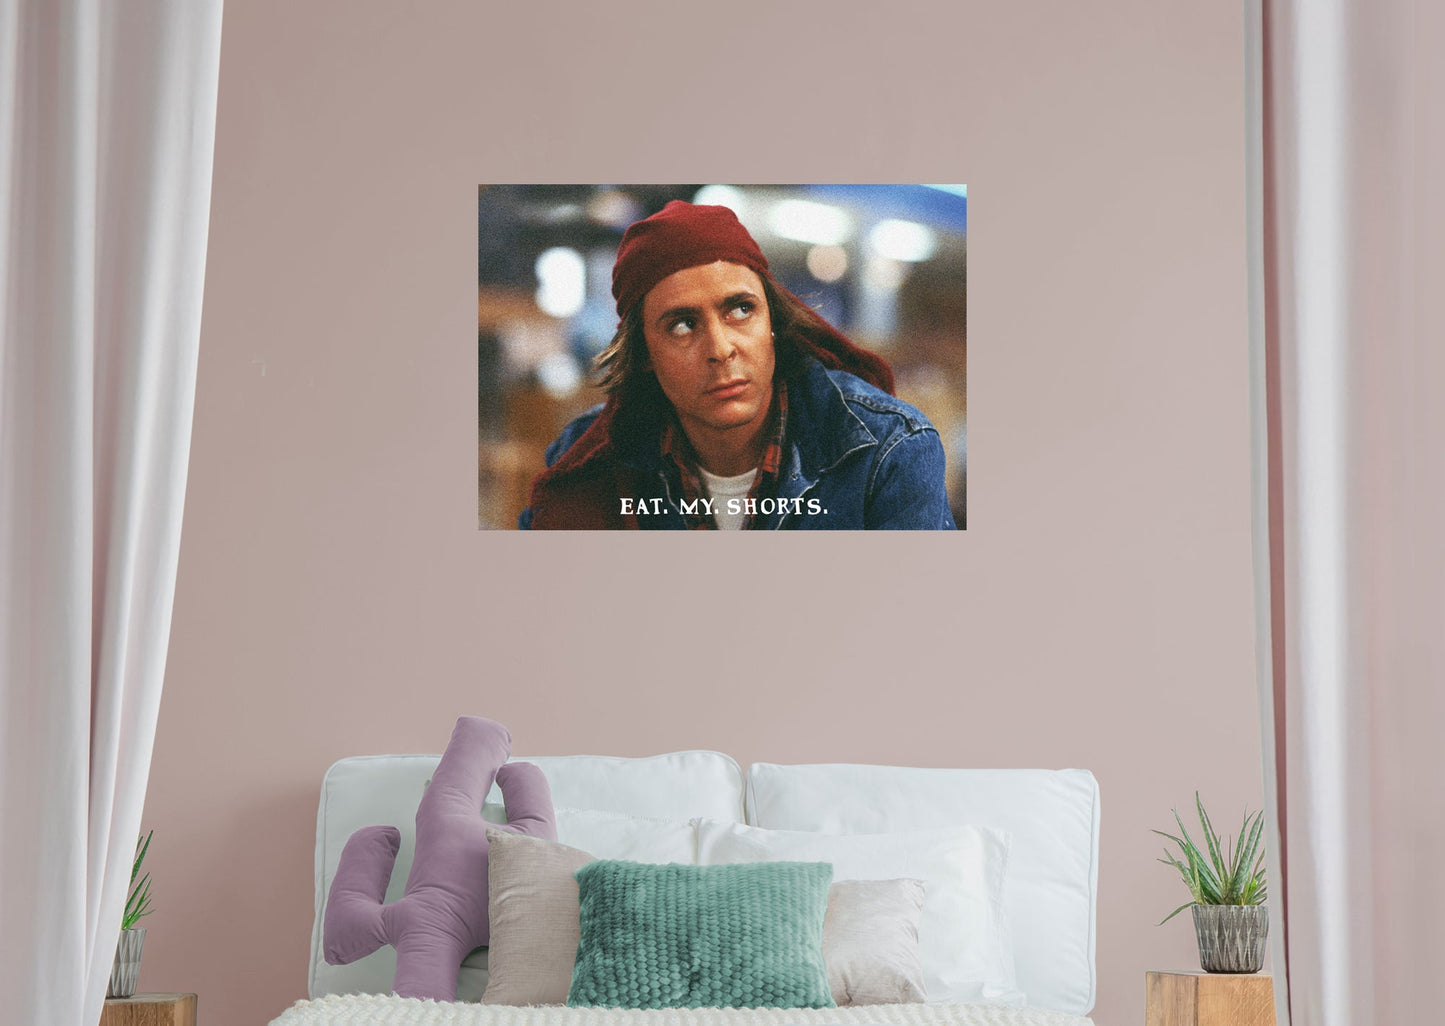 The Breakfast Club:  Eat My Shorts Mural        - Officially Licensed NBC Universal Removable Wall   Adhesive Decal